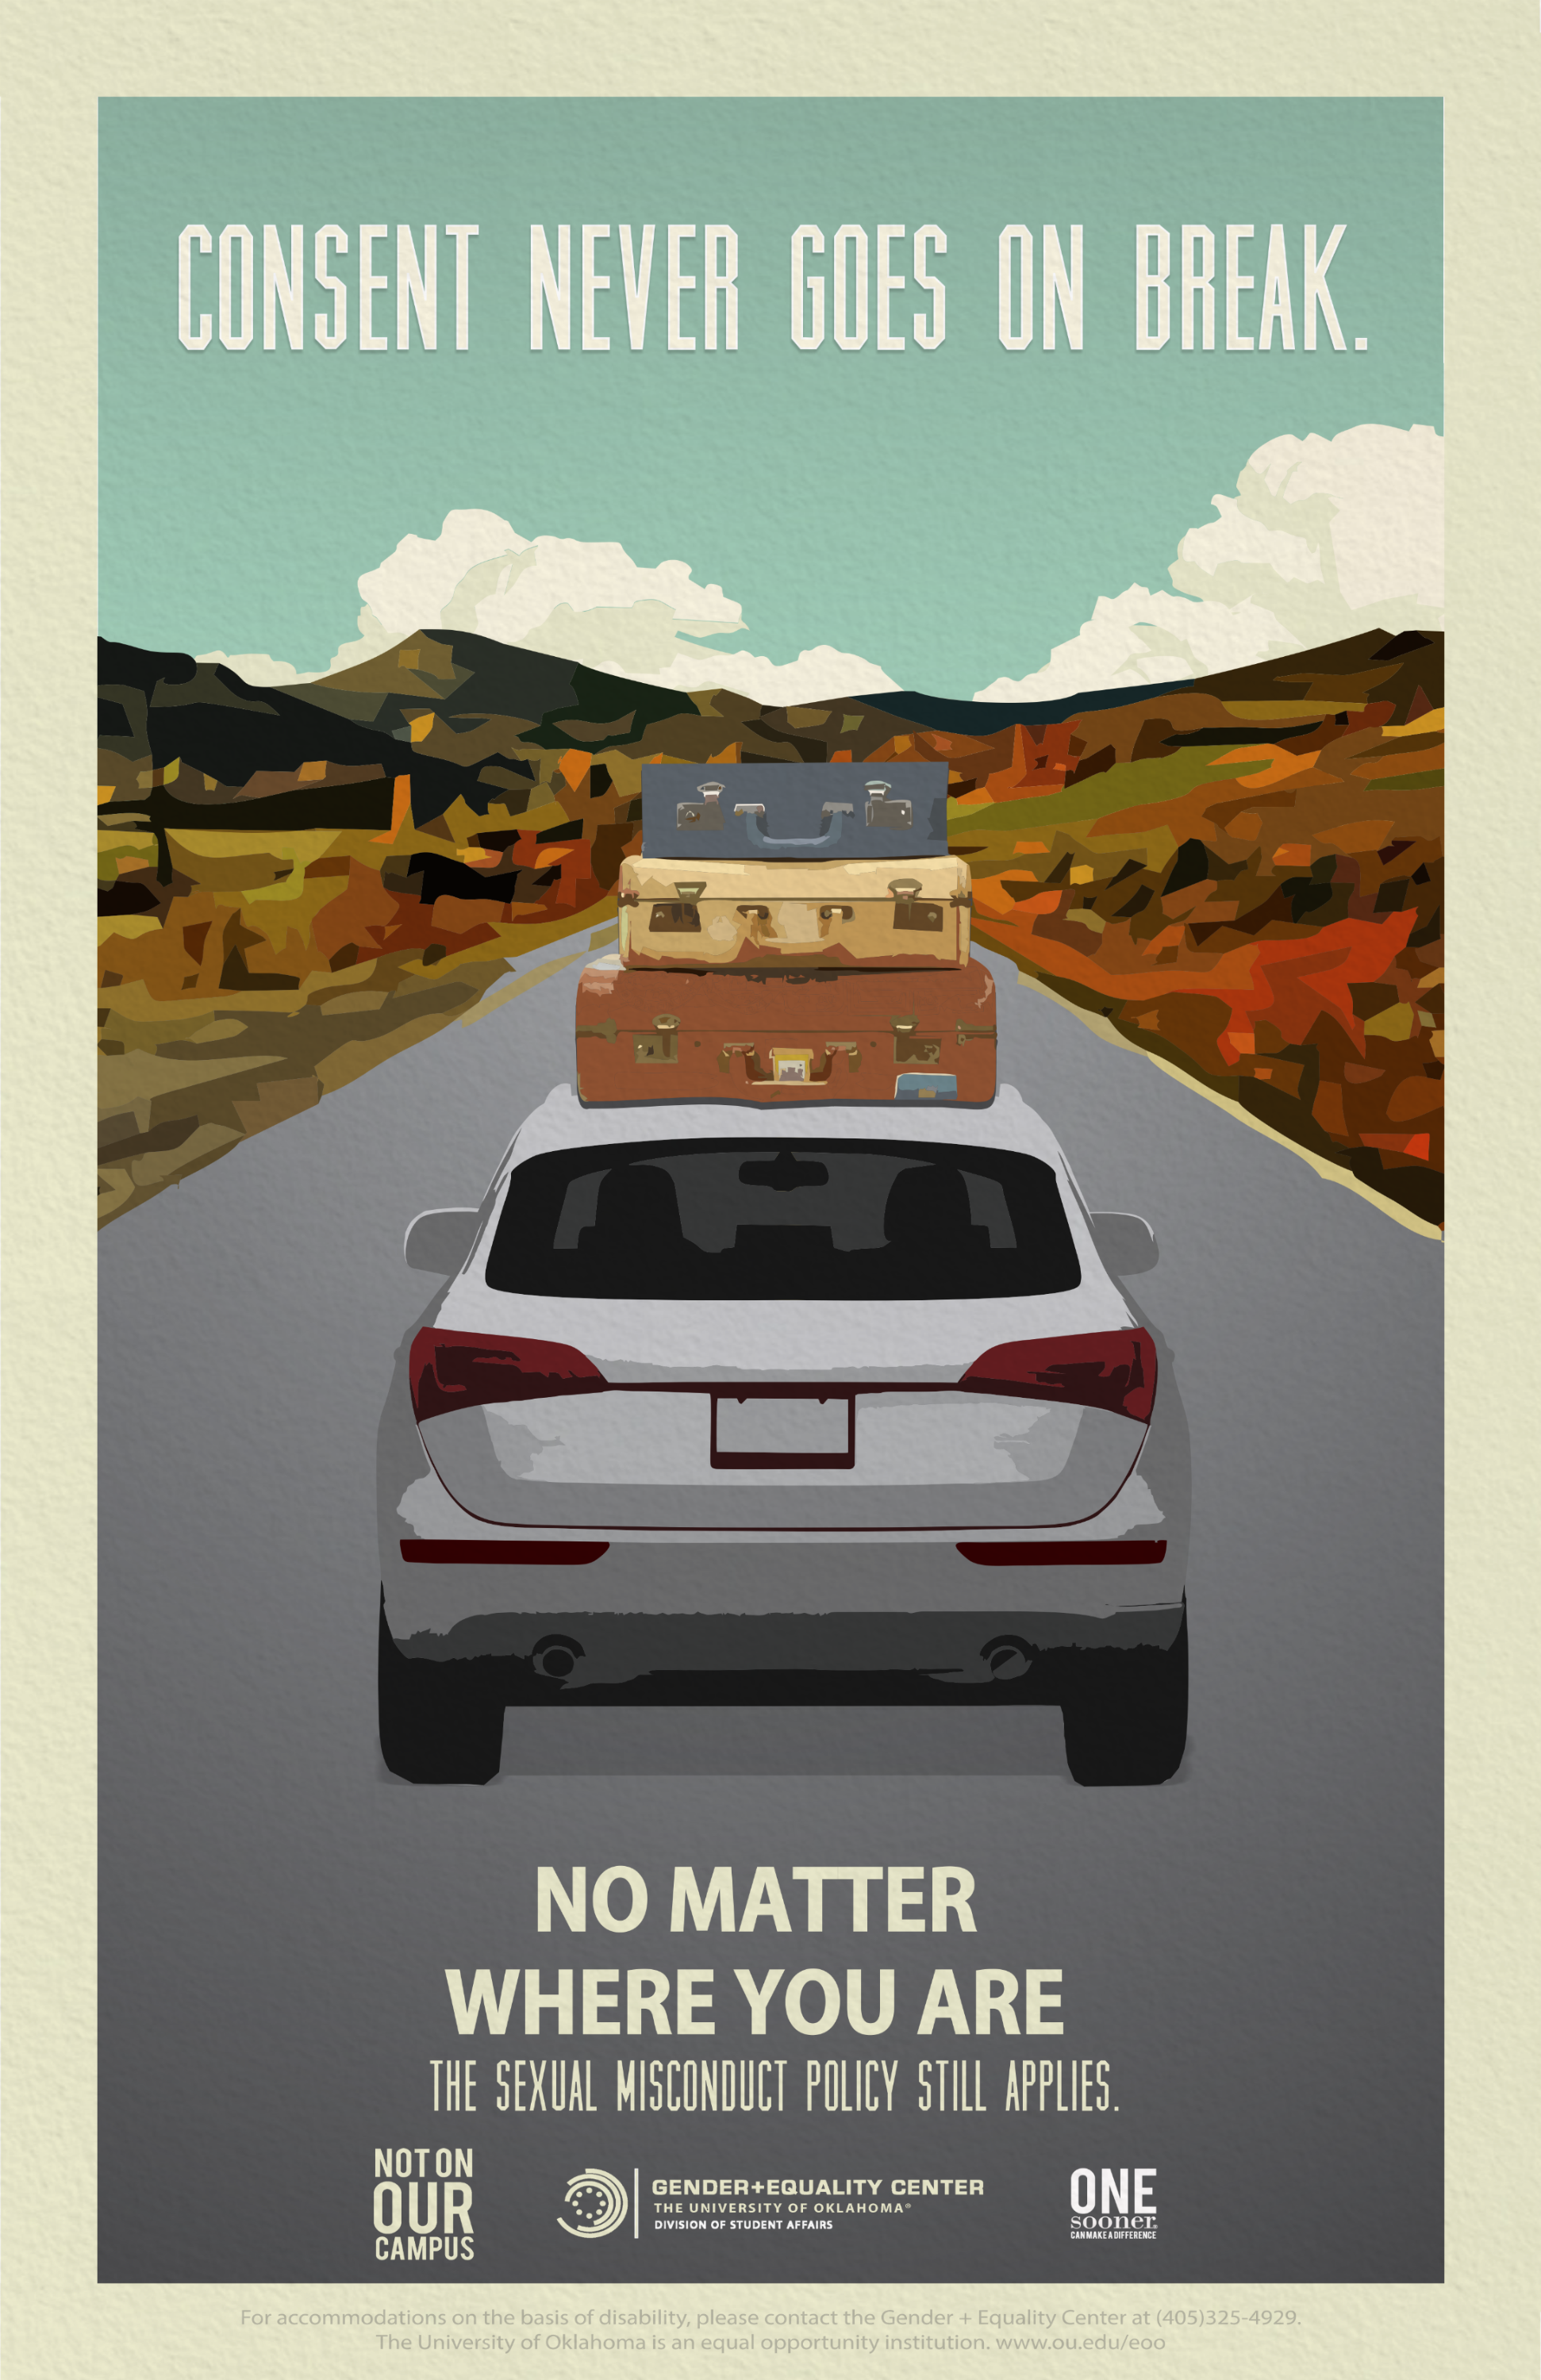 Illustration of a car with suitcases strapped to the roof, driving on a road.